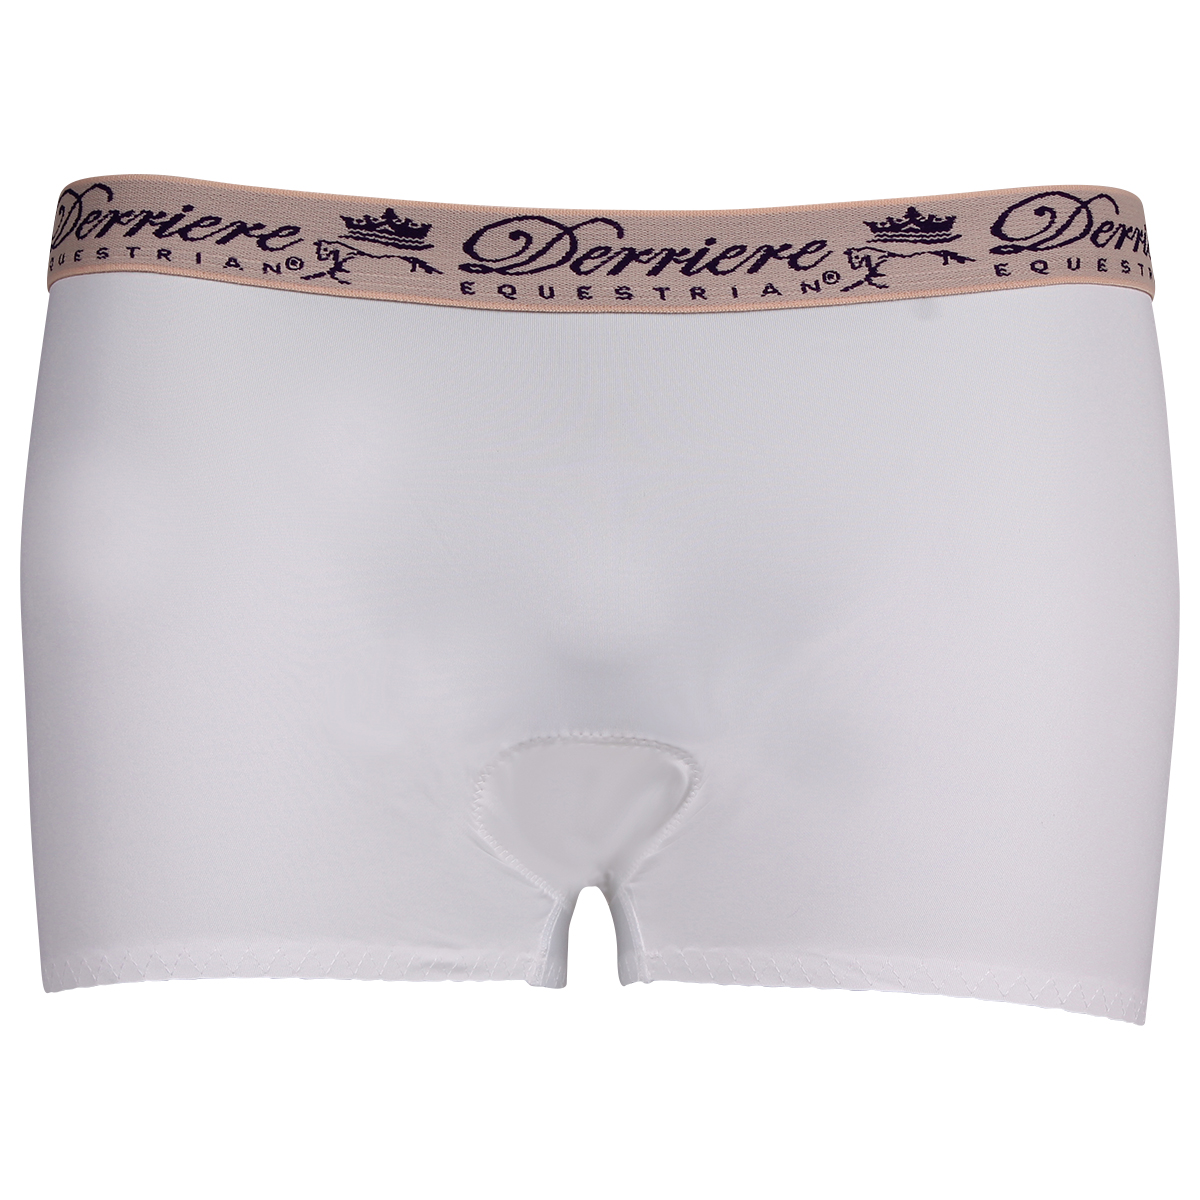 Shorty Derriere Equestrian Padded Female, L?in wit